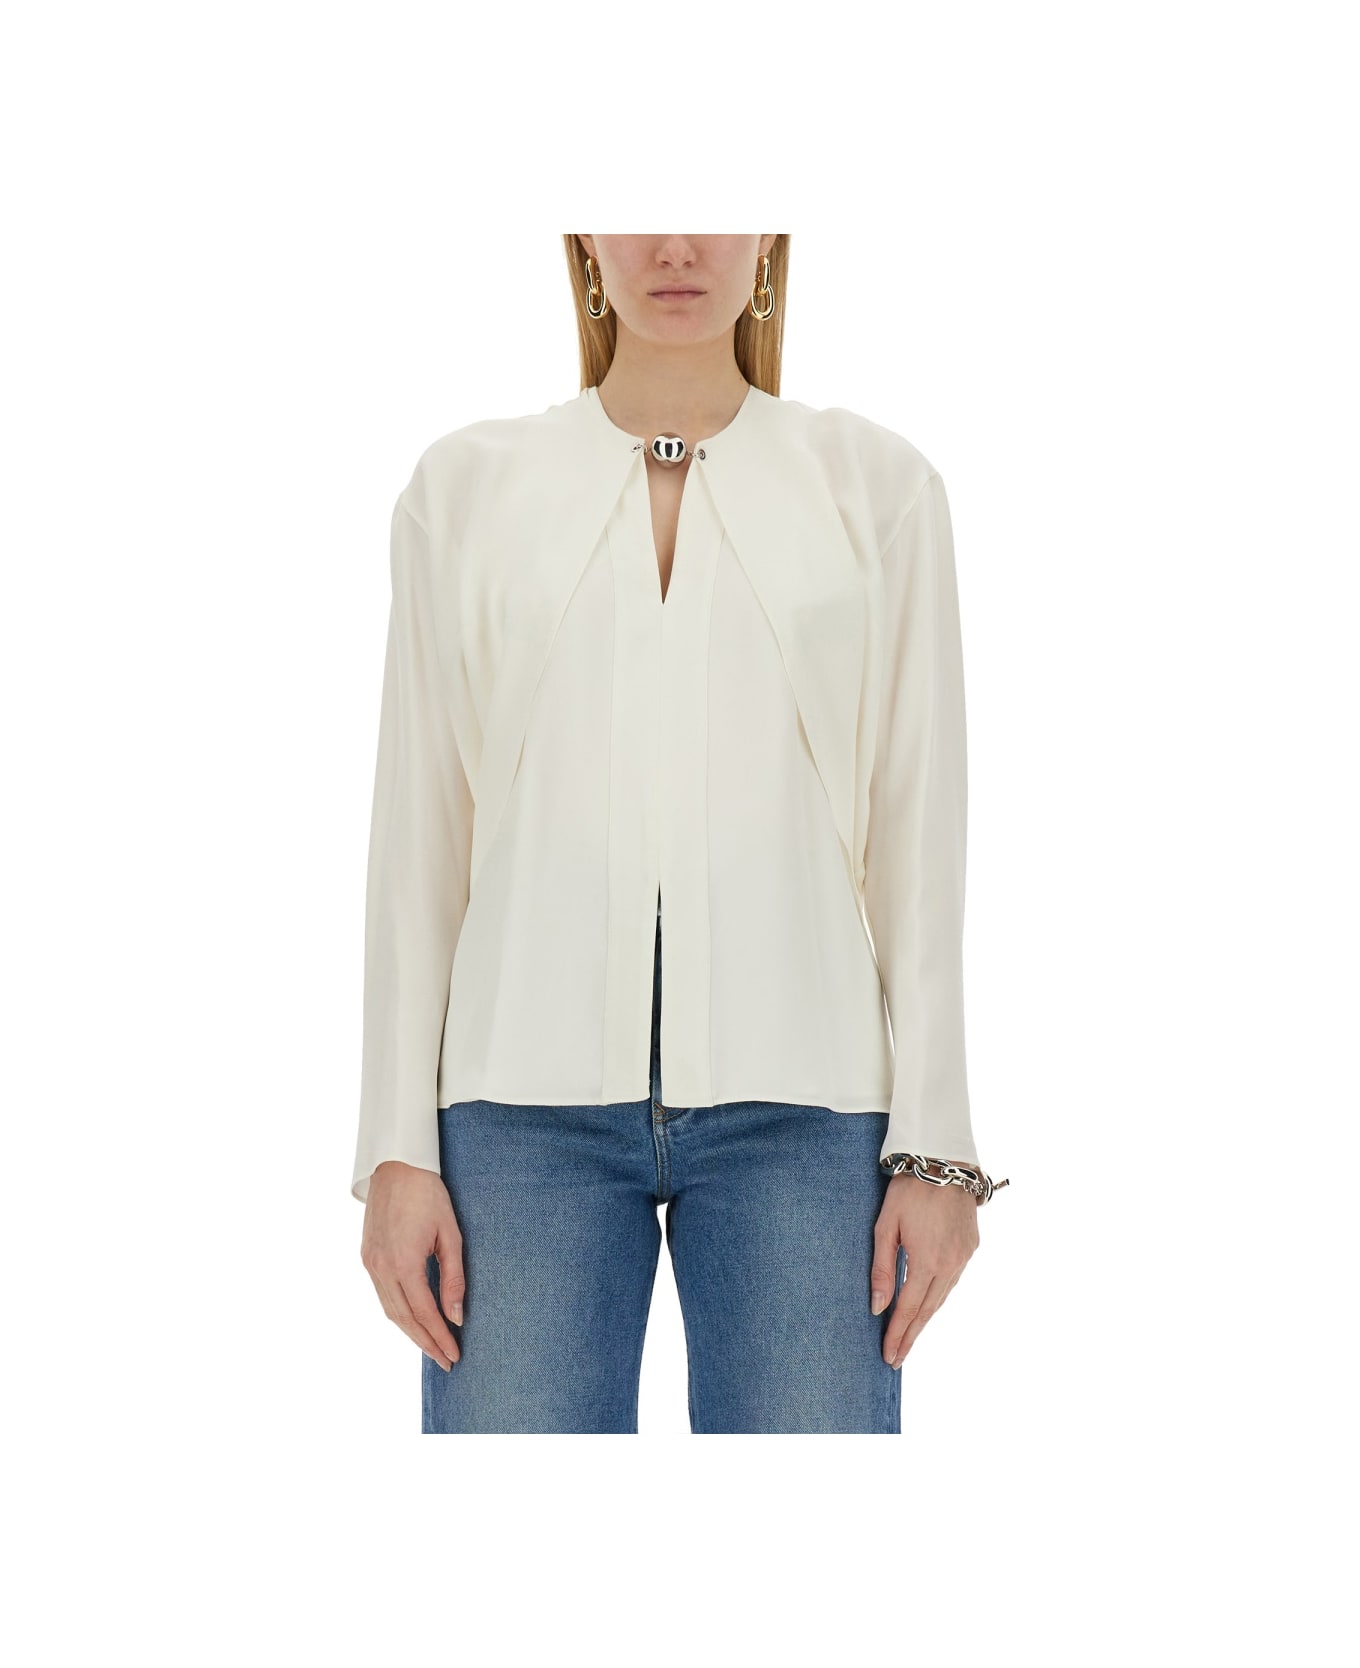 Paco Rabanne Blouse With Chain Detail - WHITE